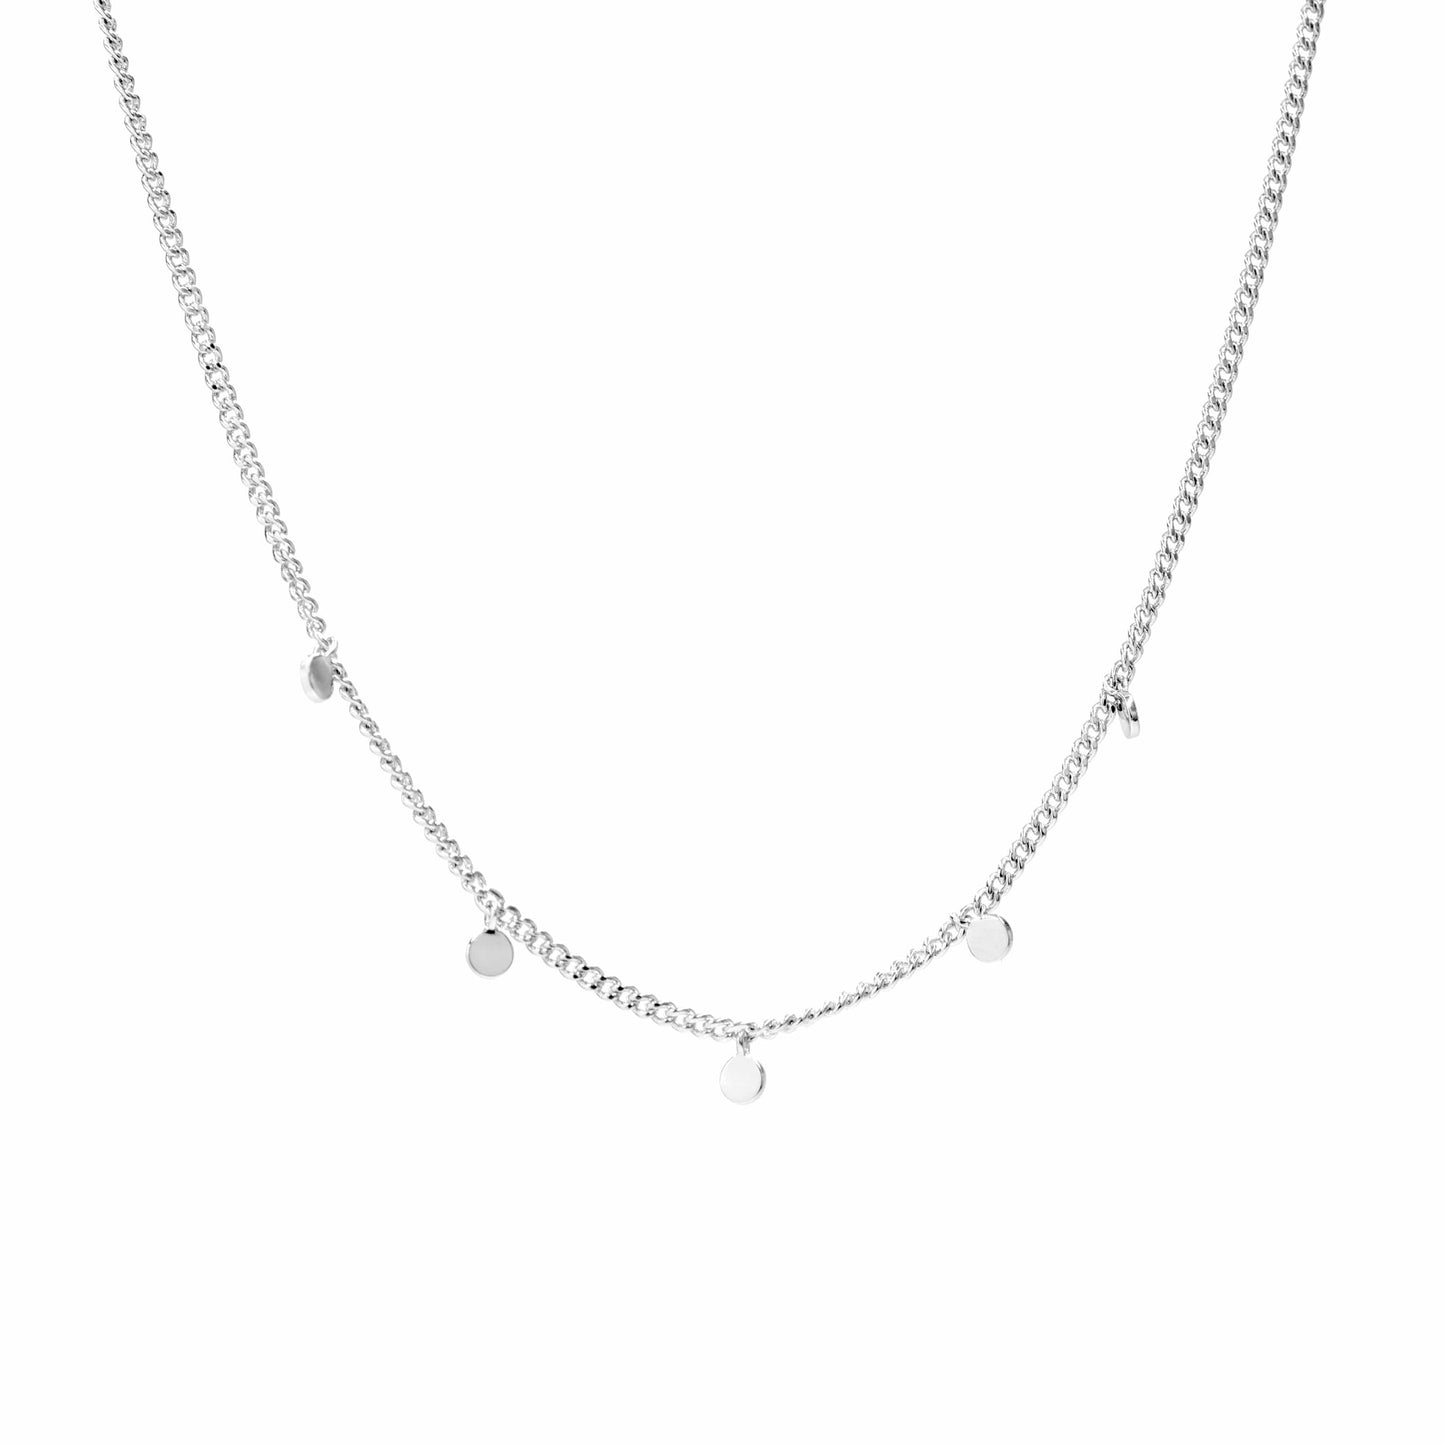 Truffle Necklace- Silver